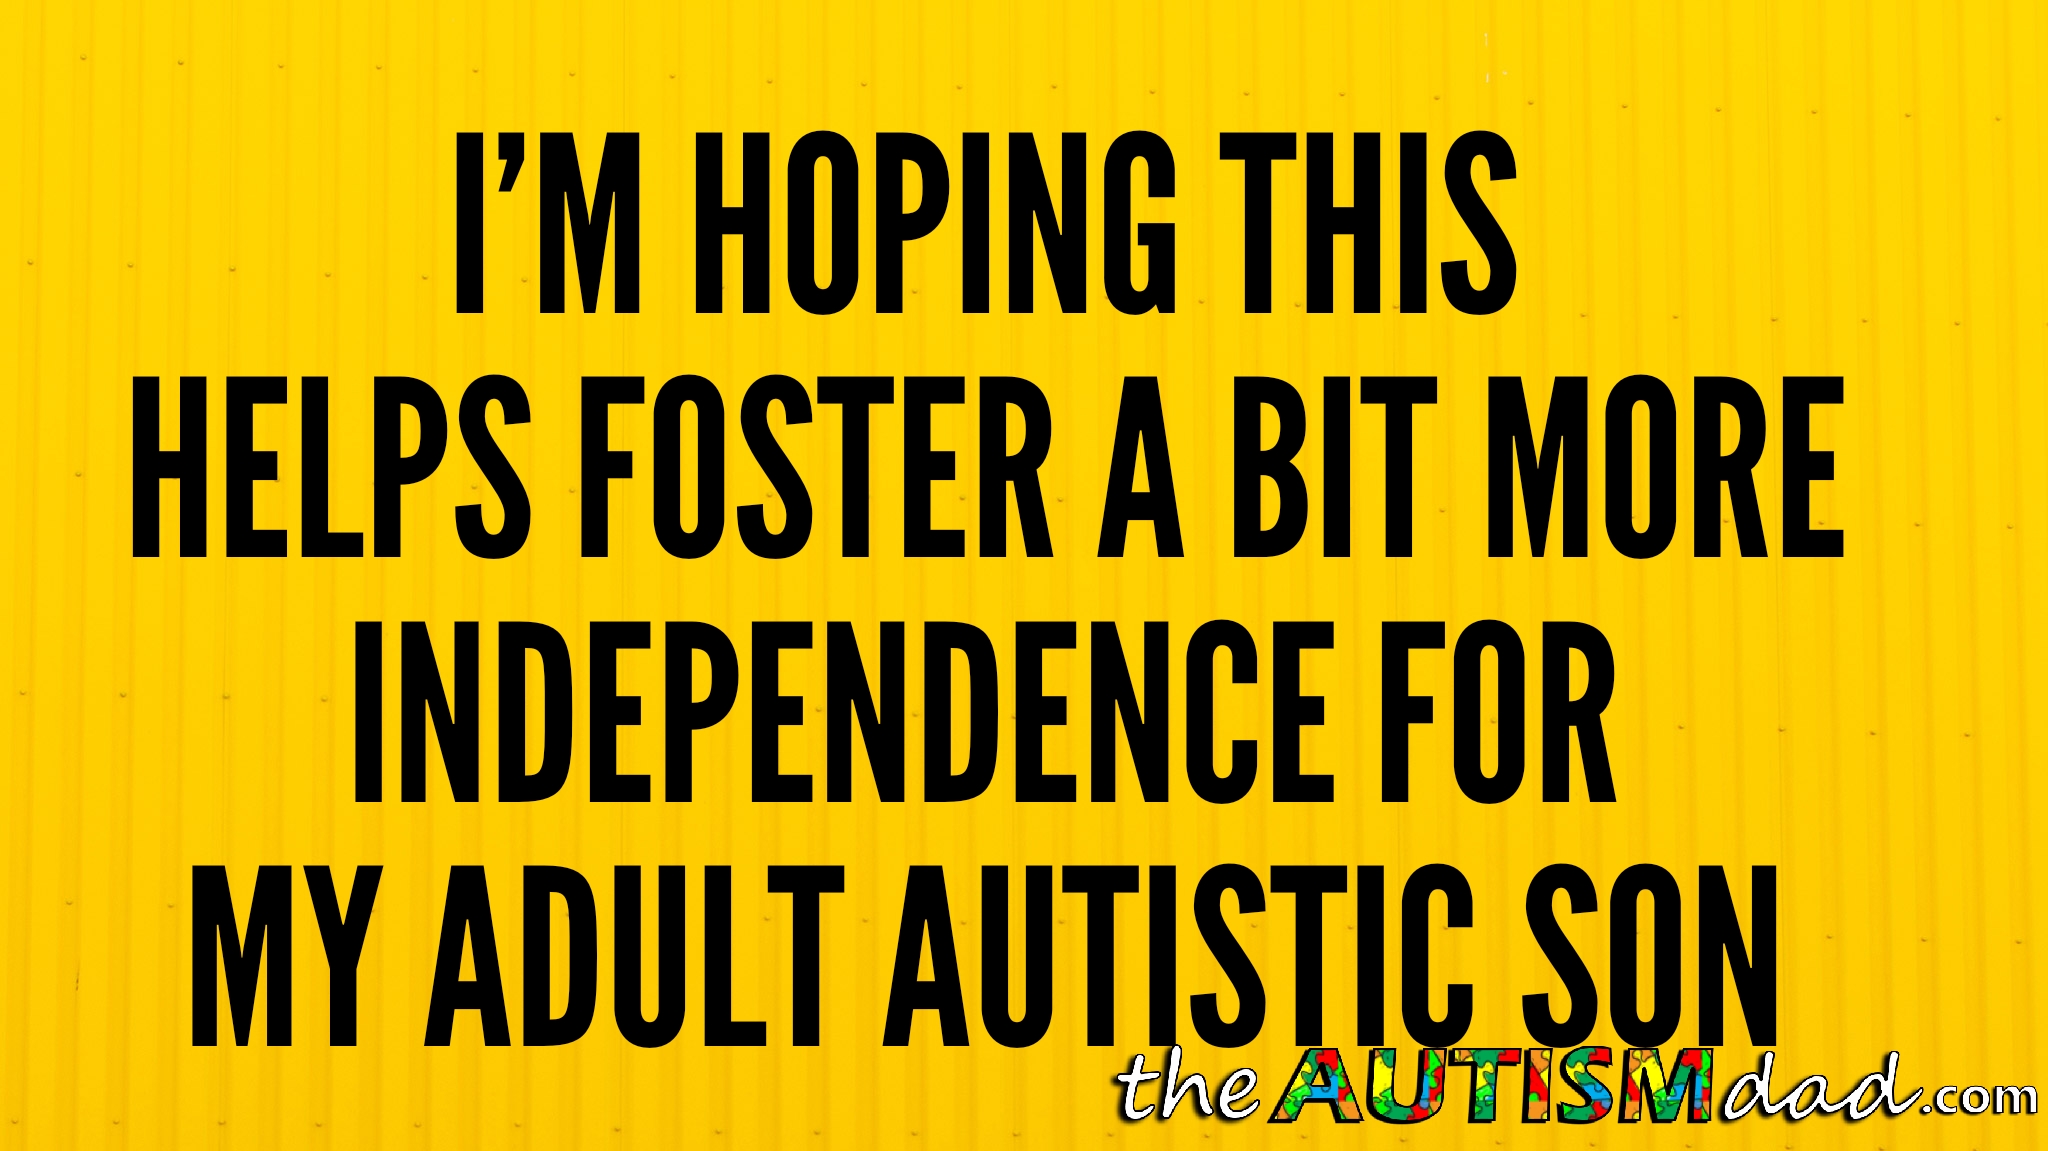 Read more about the article I’m hoping this helps foster a bit more independence for my adult #Autistic son